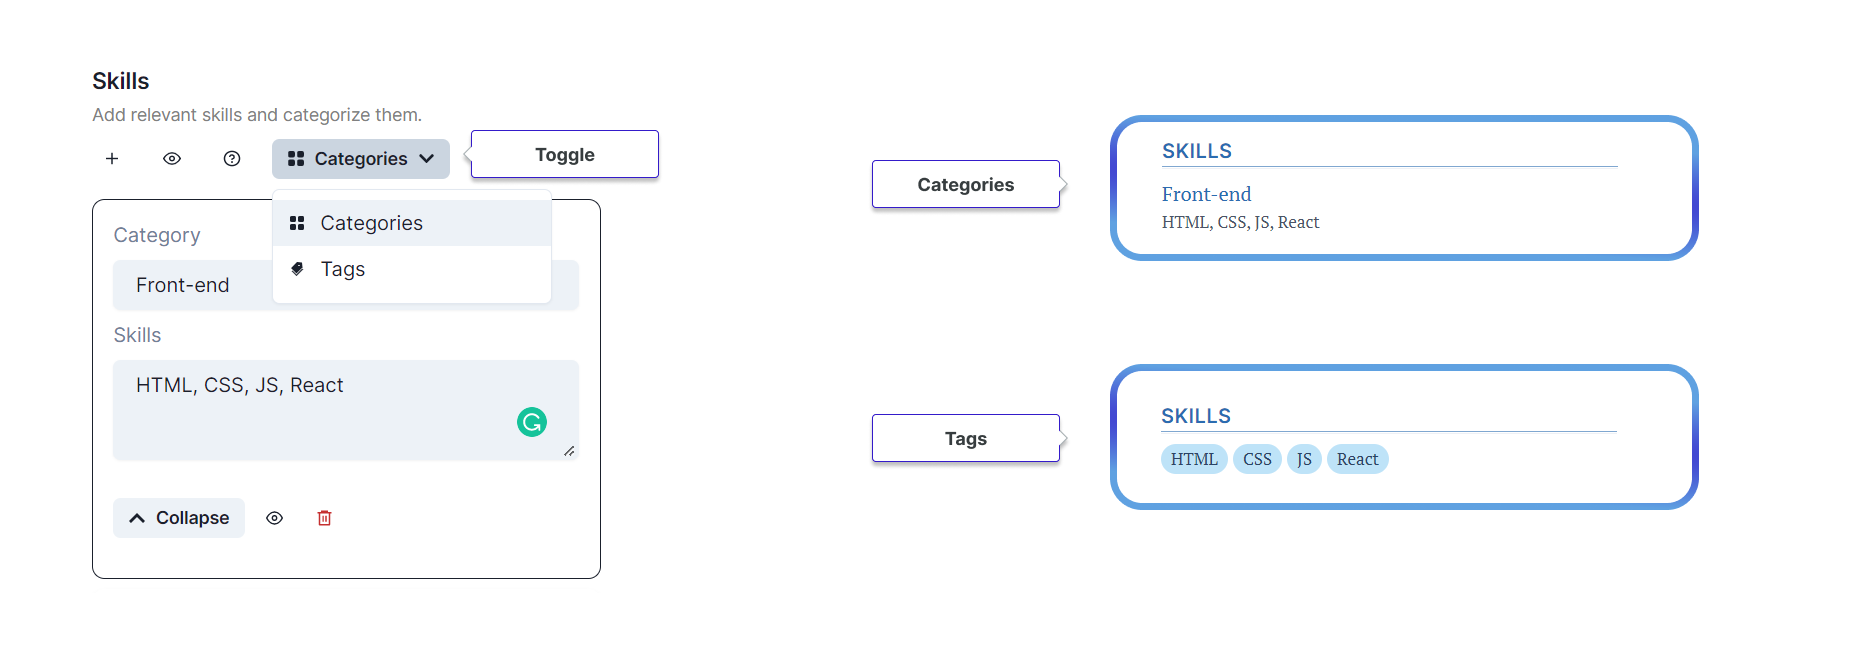 Skills - Categories and Tags